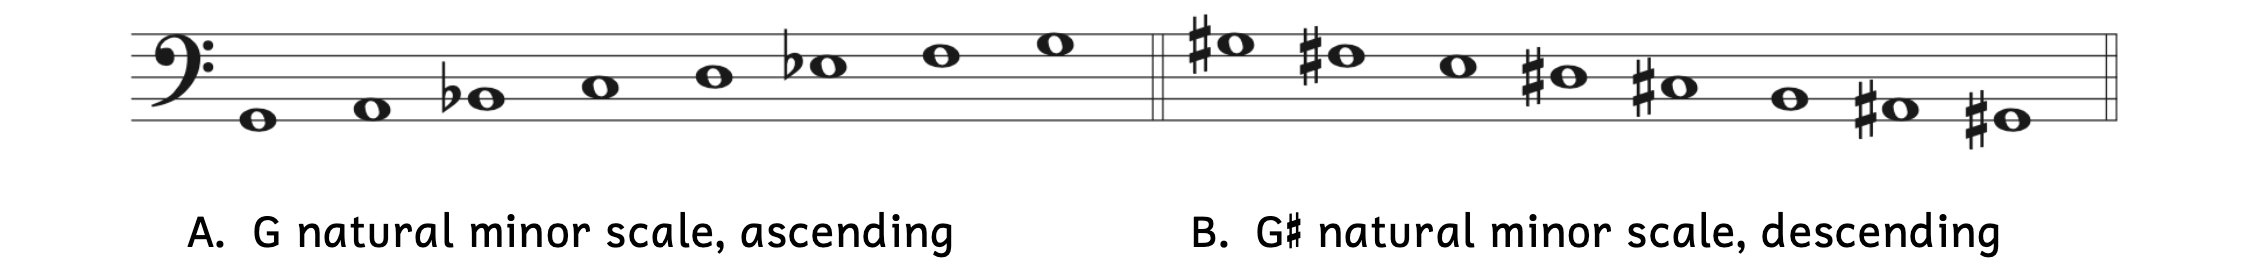 Example A is an ascending G natural minor scale and Example B is a descending G-sharp natural minor scale.